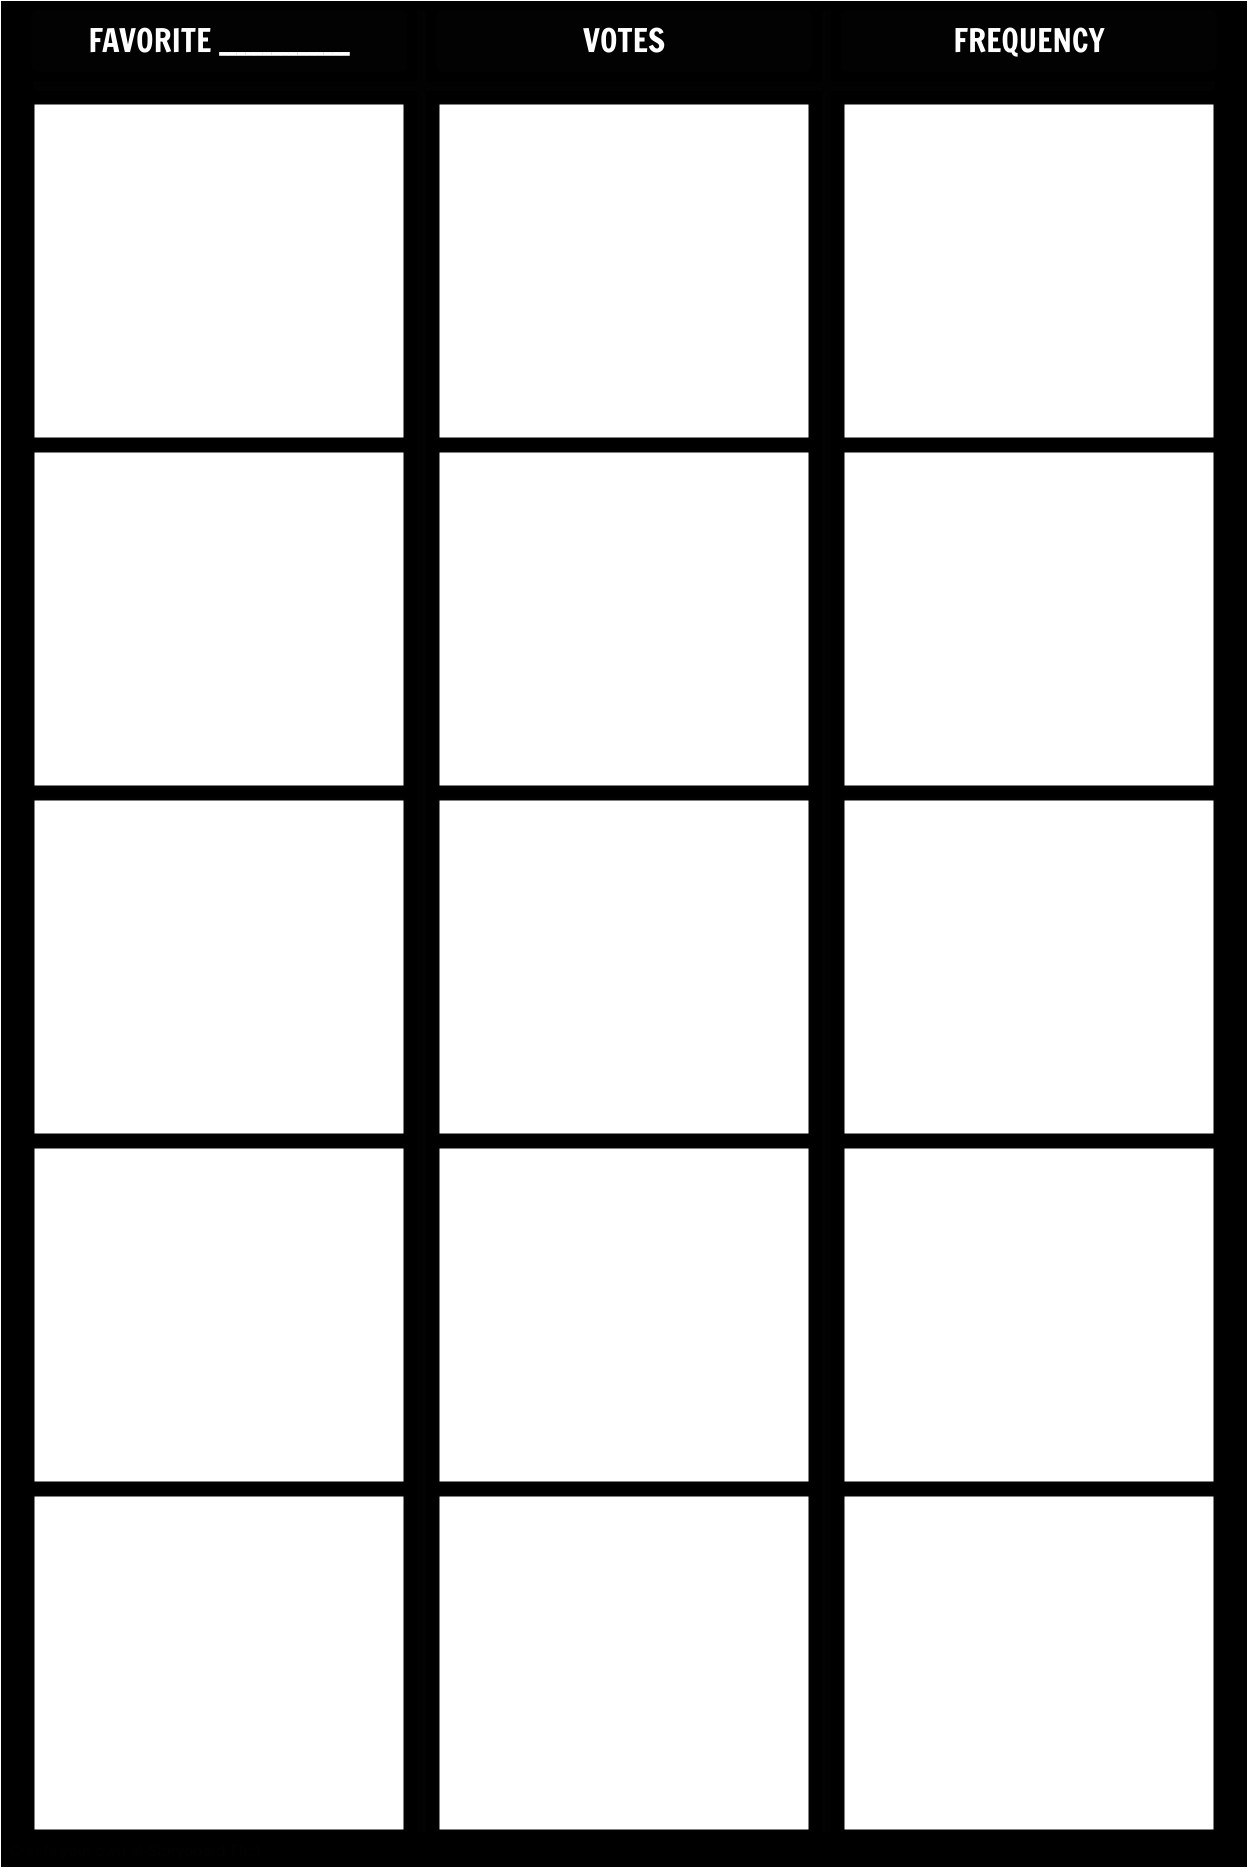 frequency tally chart template